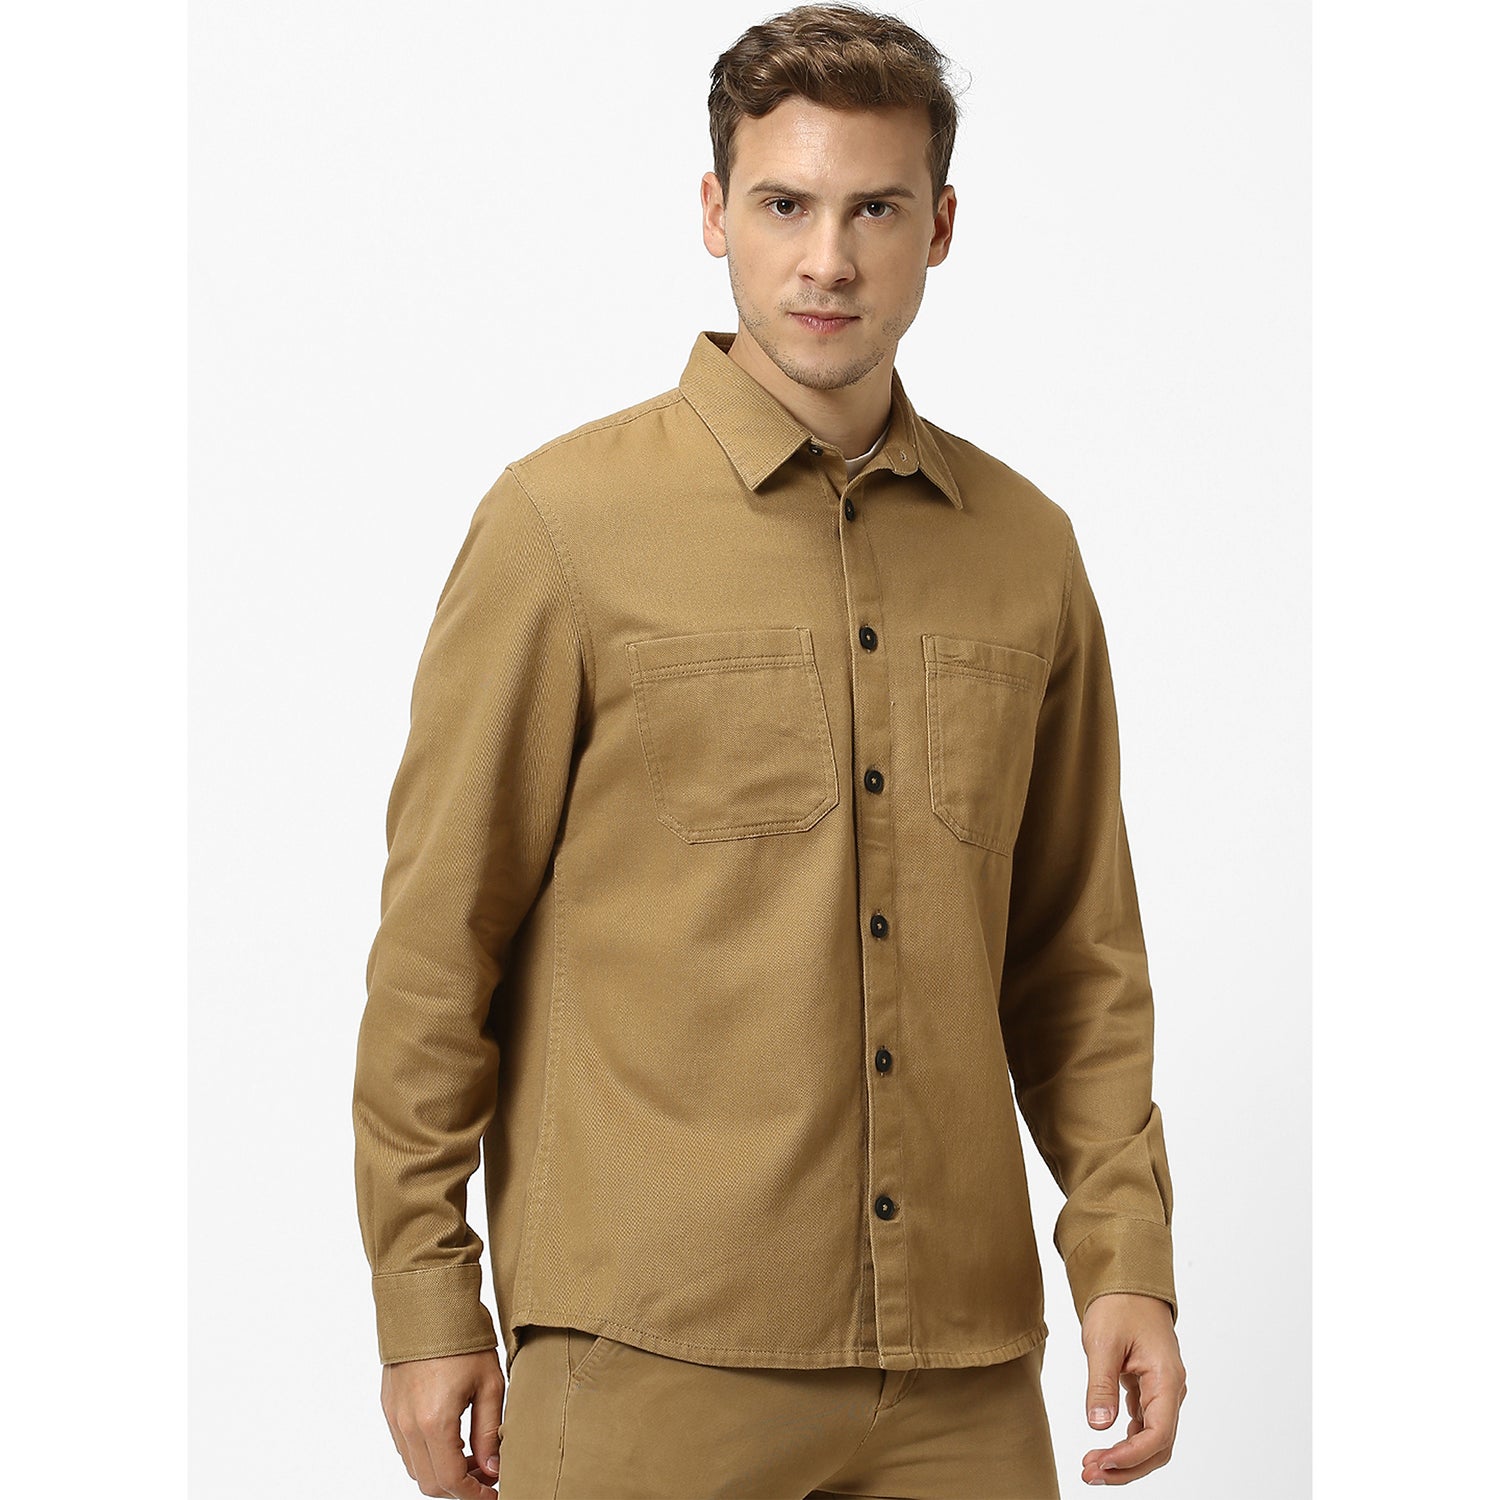 Men's Green Solid Casual Shirts (RAWORK)